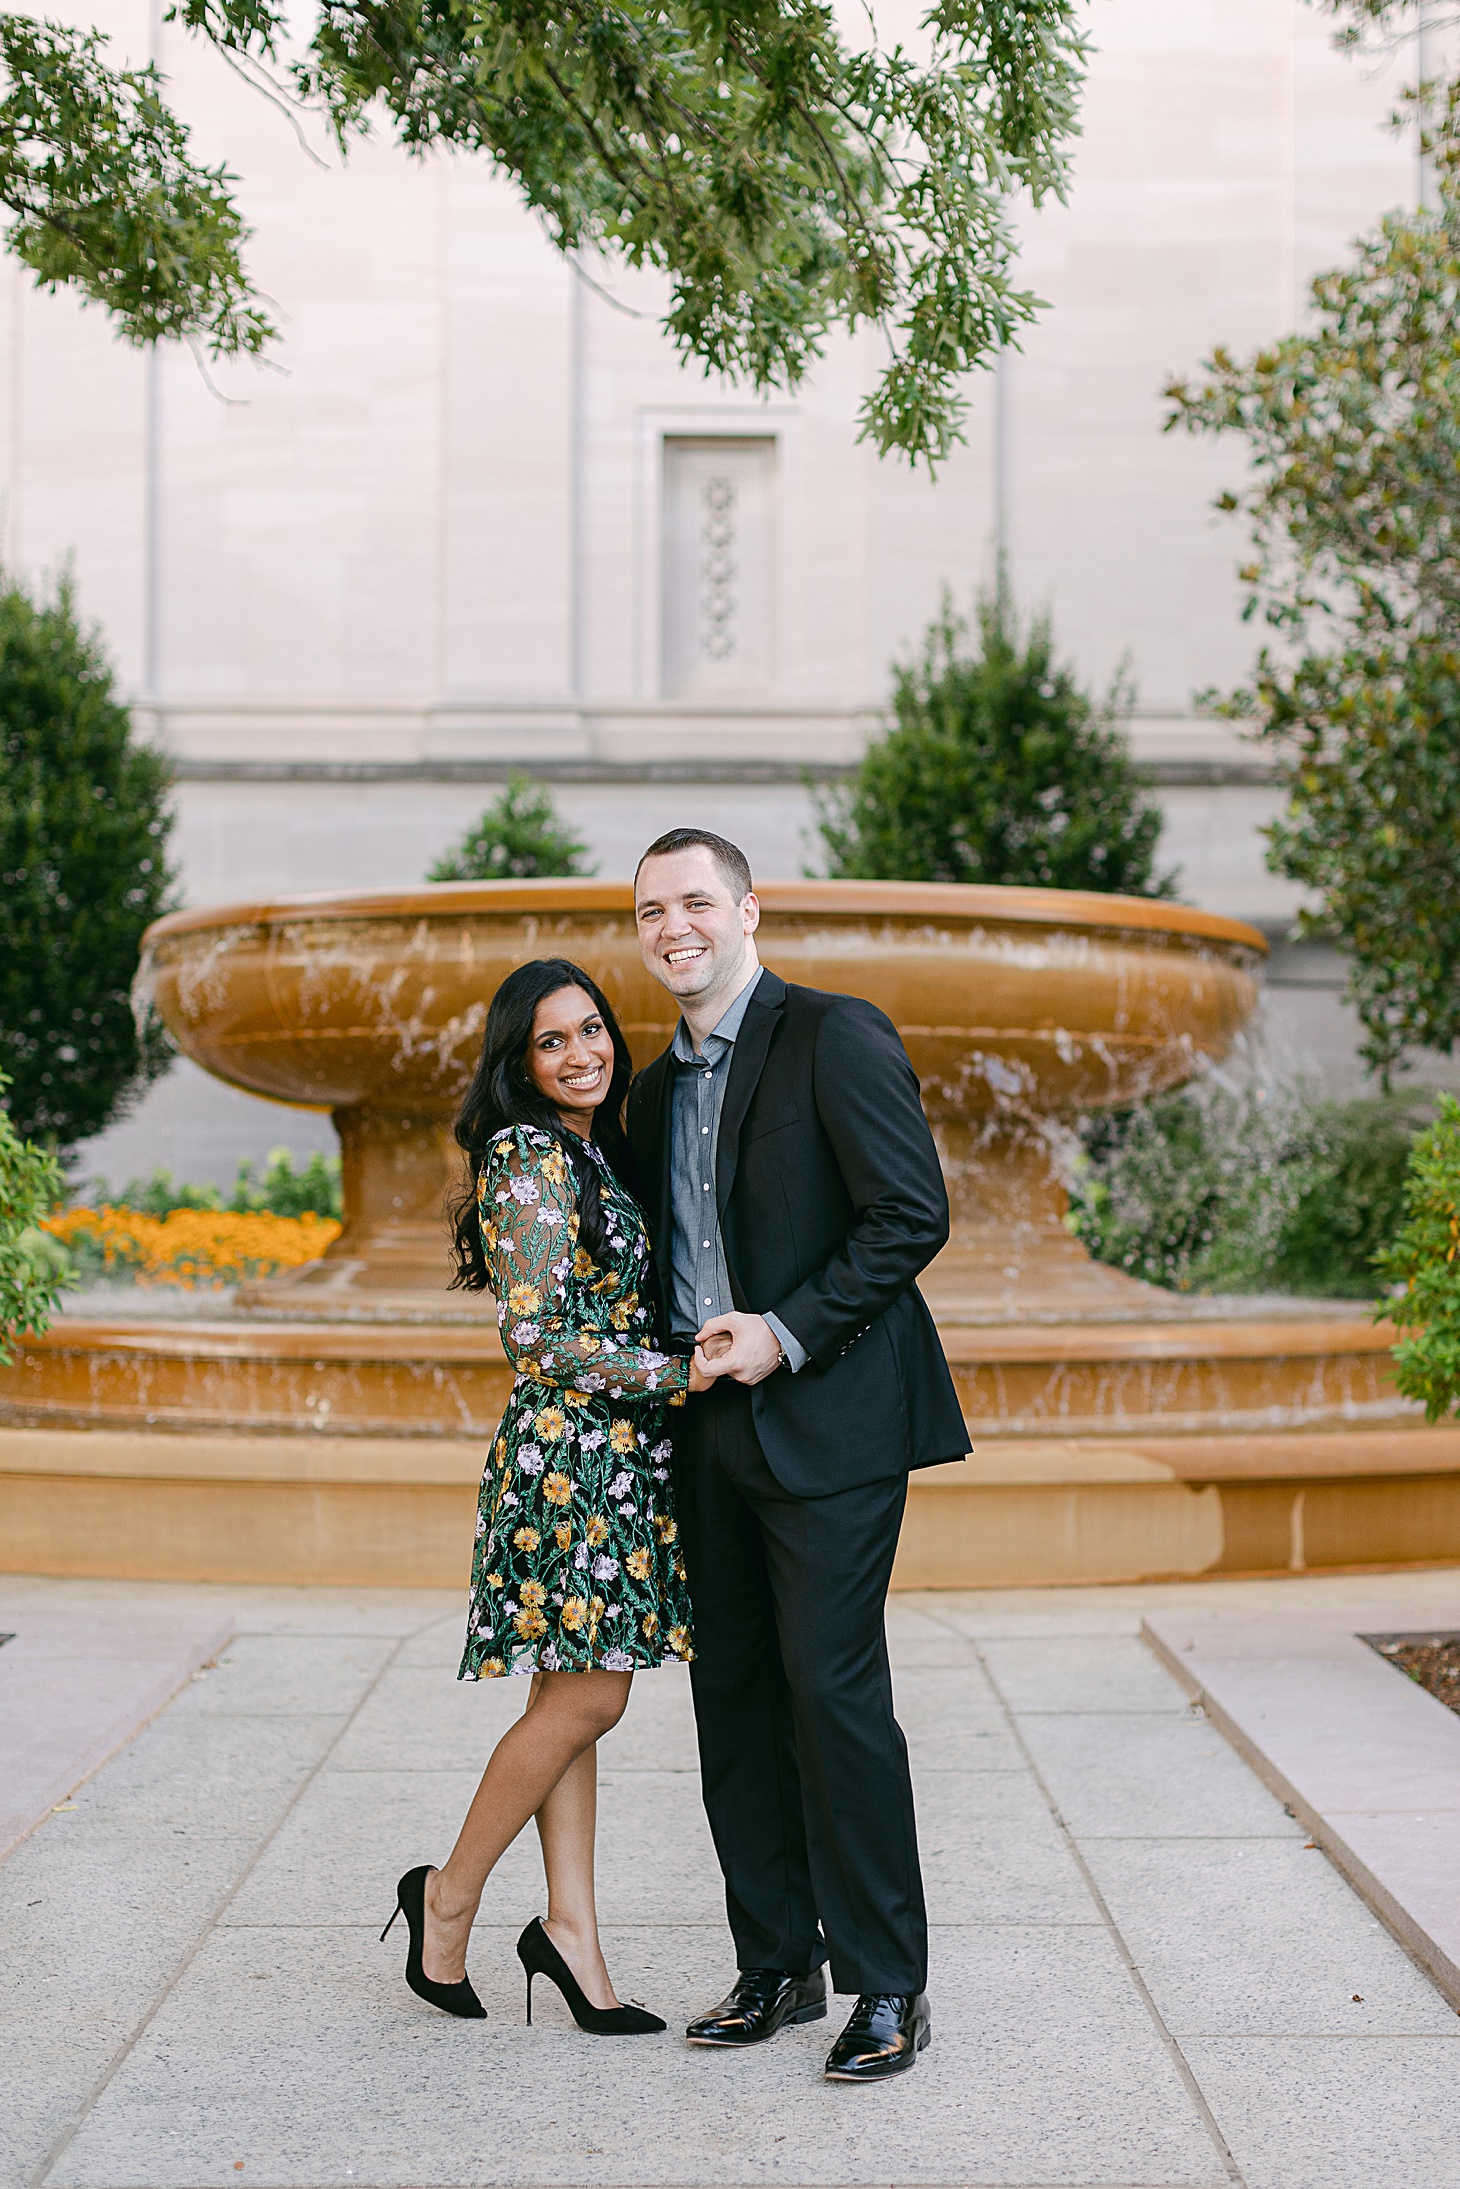 Sunset engagement portraits with Southeast Asian bride at National Gallery of Art by Sarah Bradshaw Photography